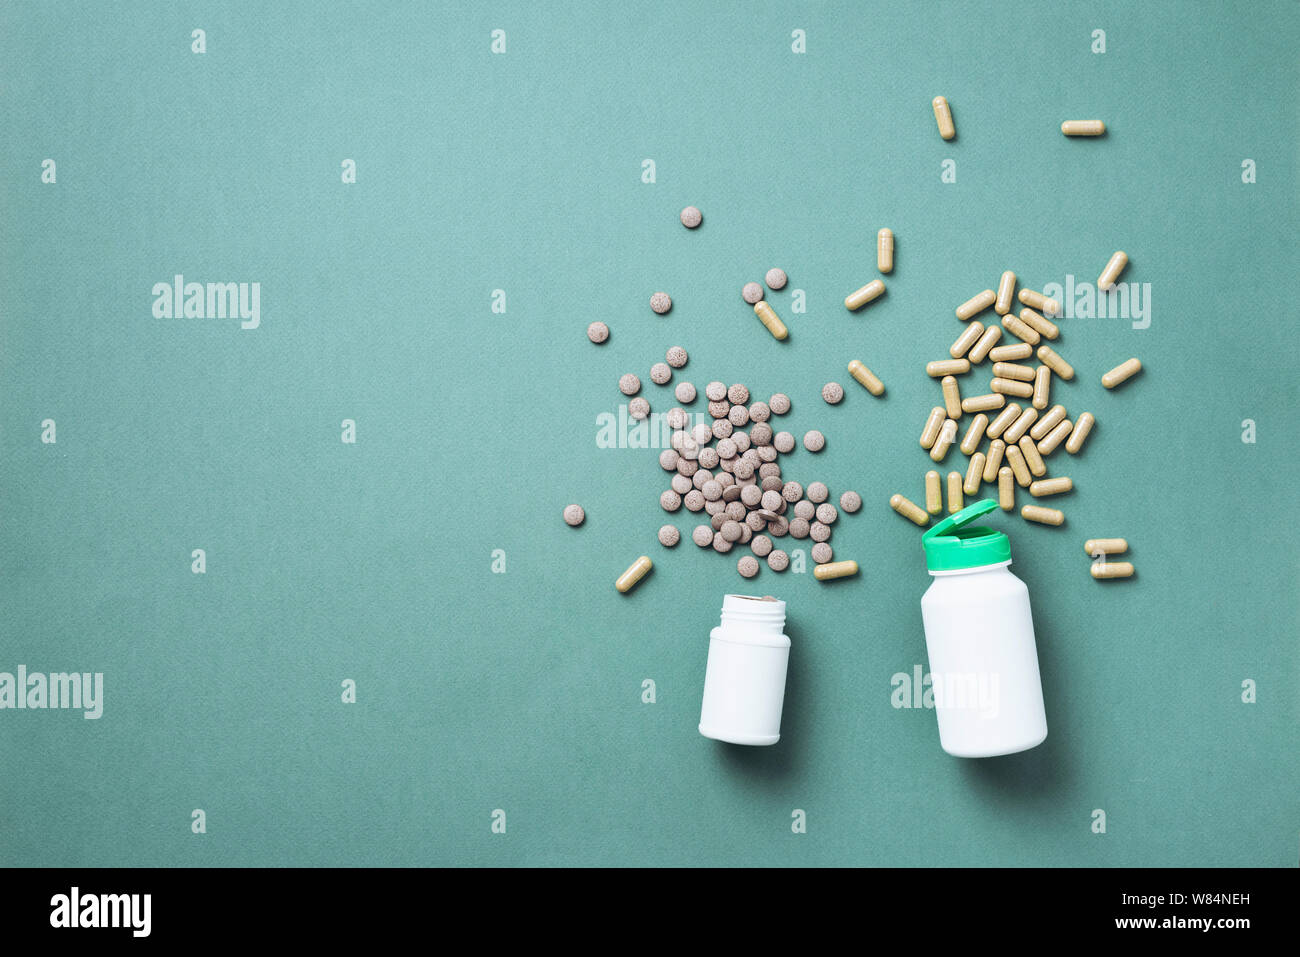 Eucalyptus extract capsules, pills, tabletes over green background with copy space. Prevention and health concept. Alternative medicine. Stock Photo